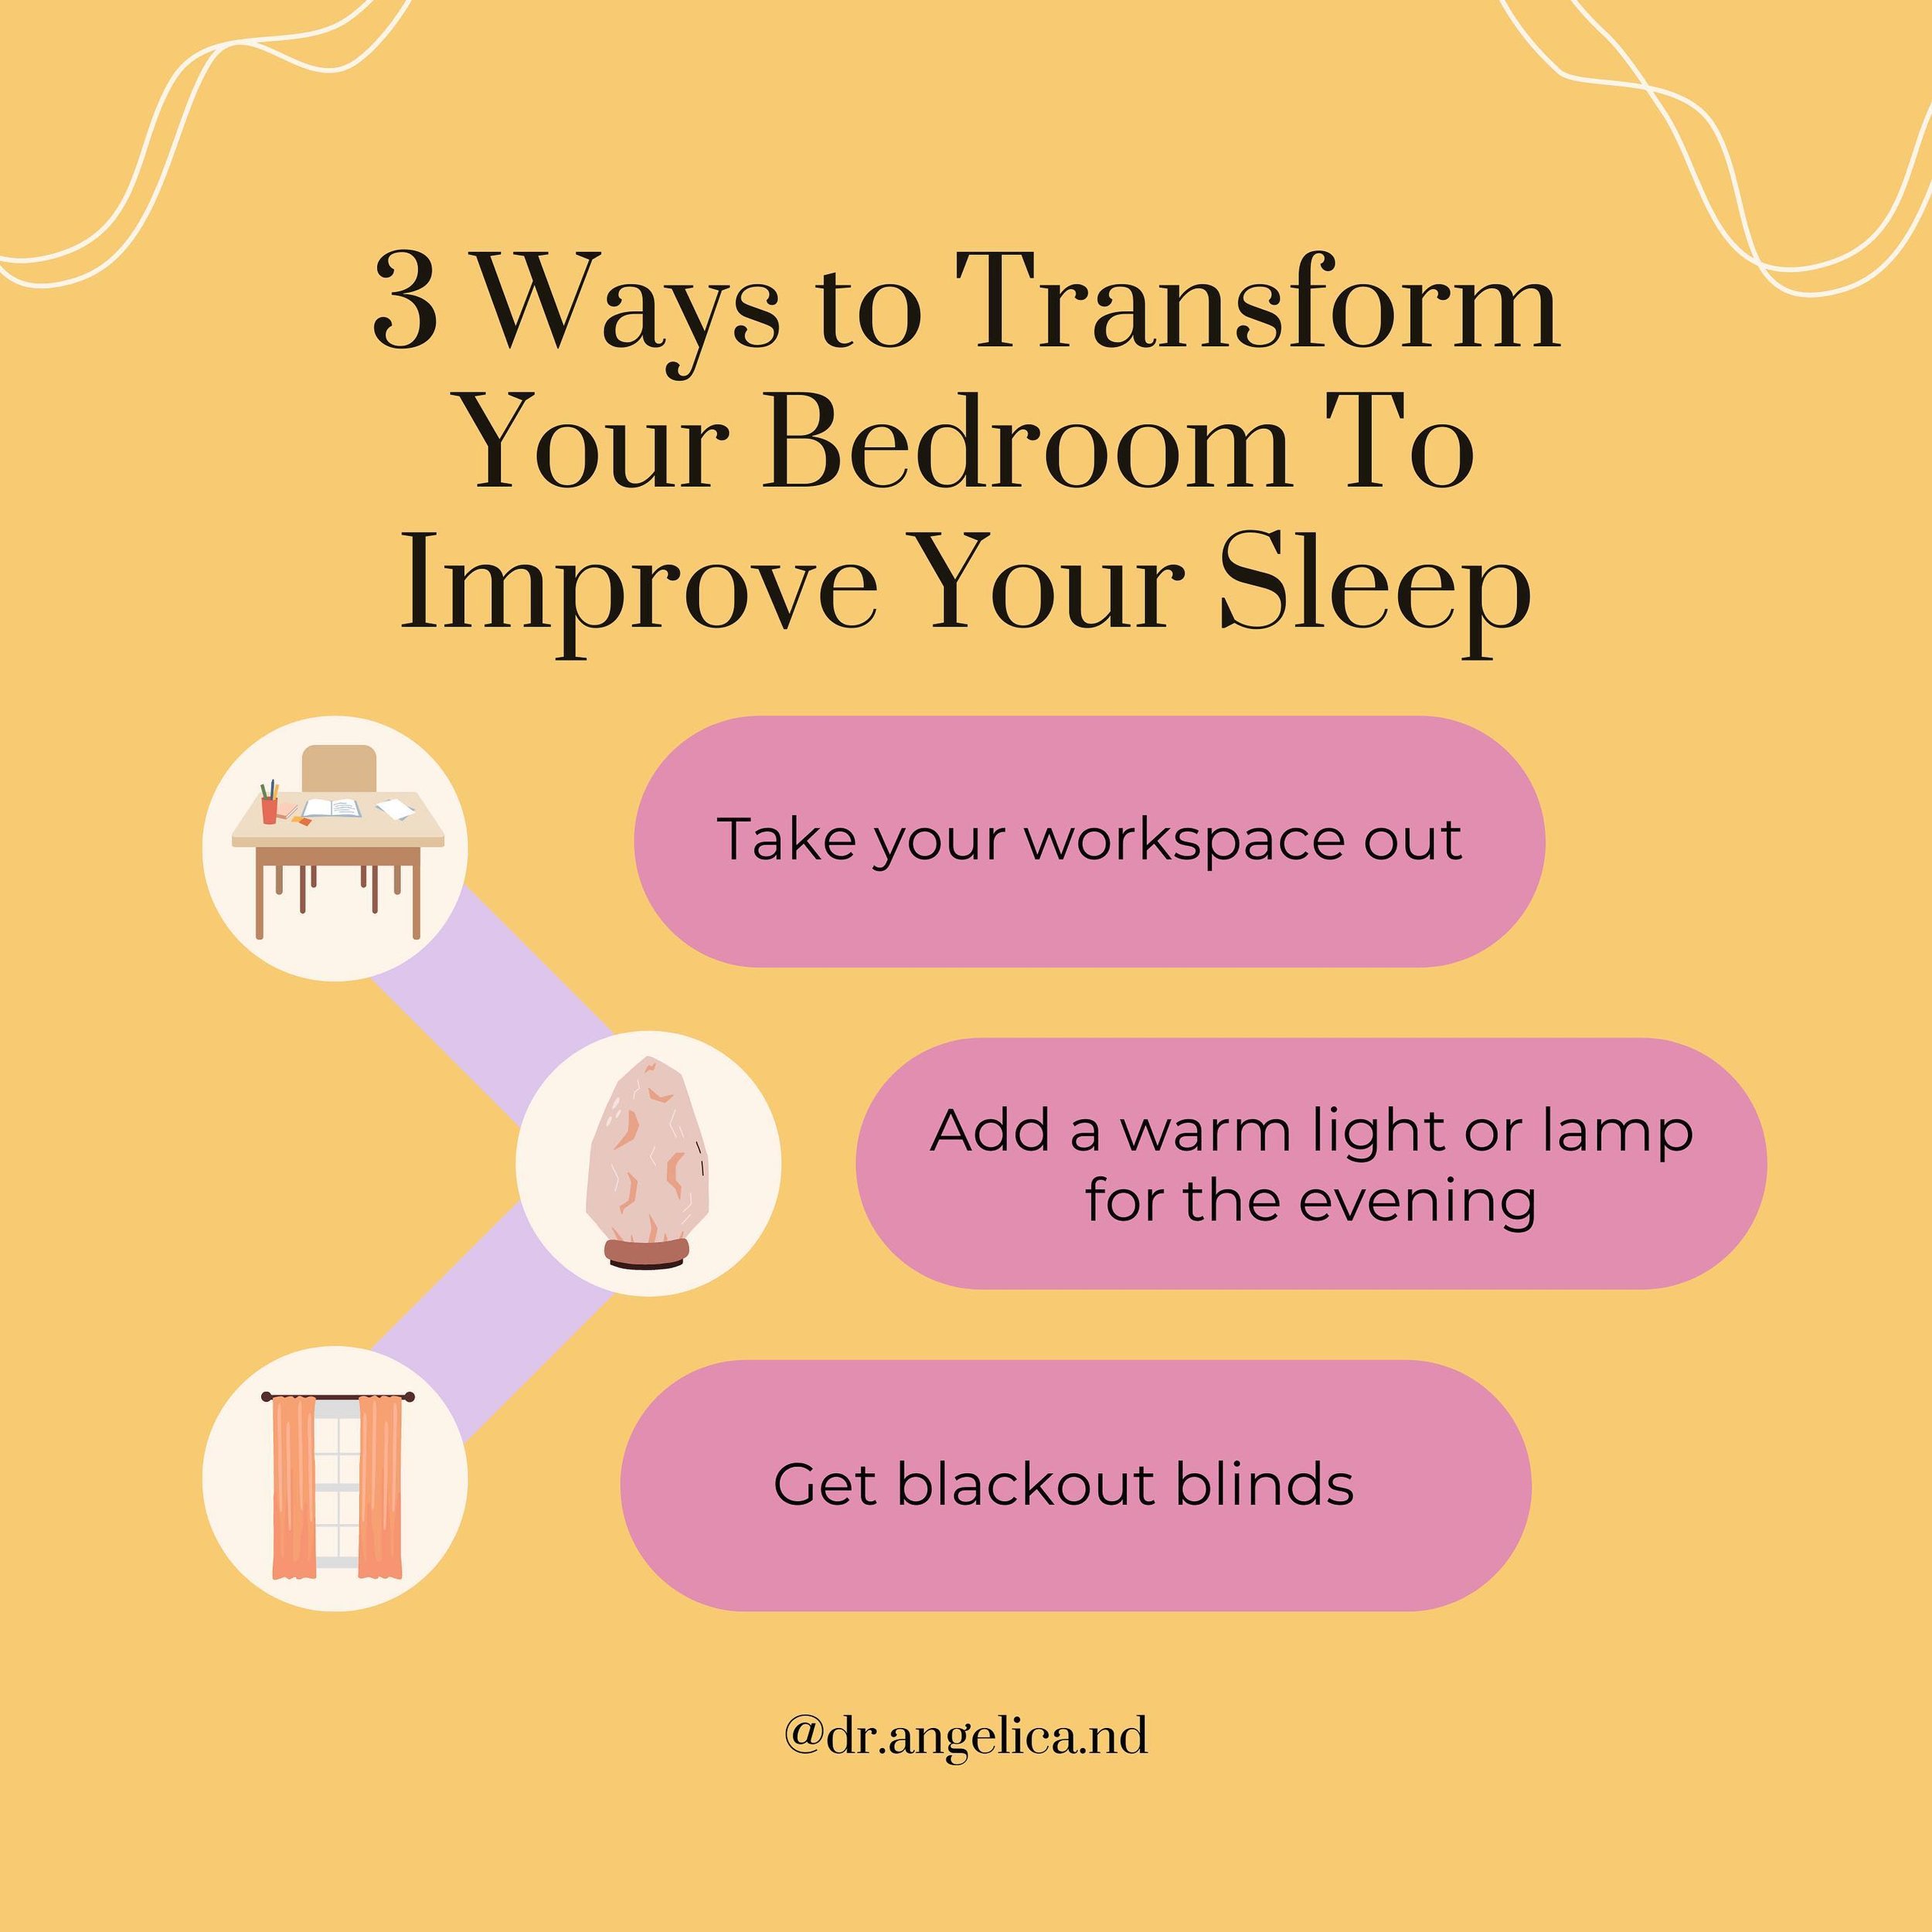 If you&rsquo;re struggling with your sleep, try these tips to transform your bedroom into a place of tranquility and sleepiness 🌙⬇️

🛌 Take your workspace out. If you&rsquo;re able to, remove any workspace from your bedroom. If this isn&rsquo;t pos